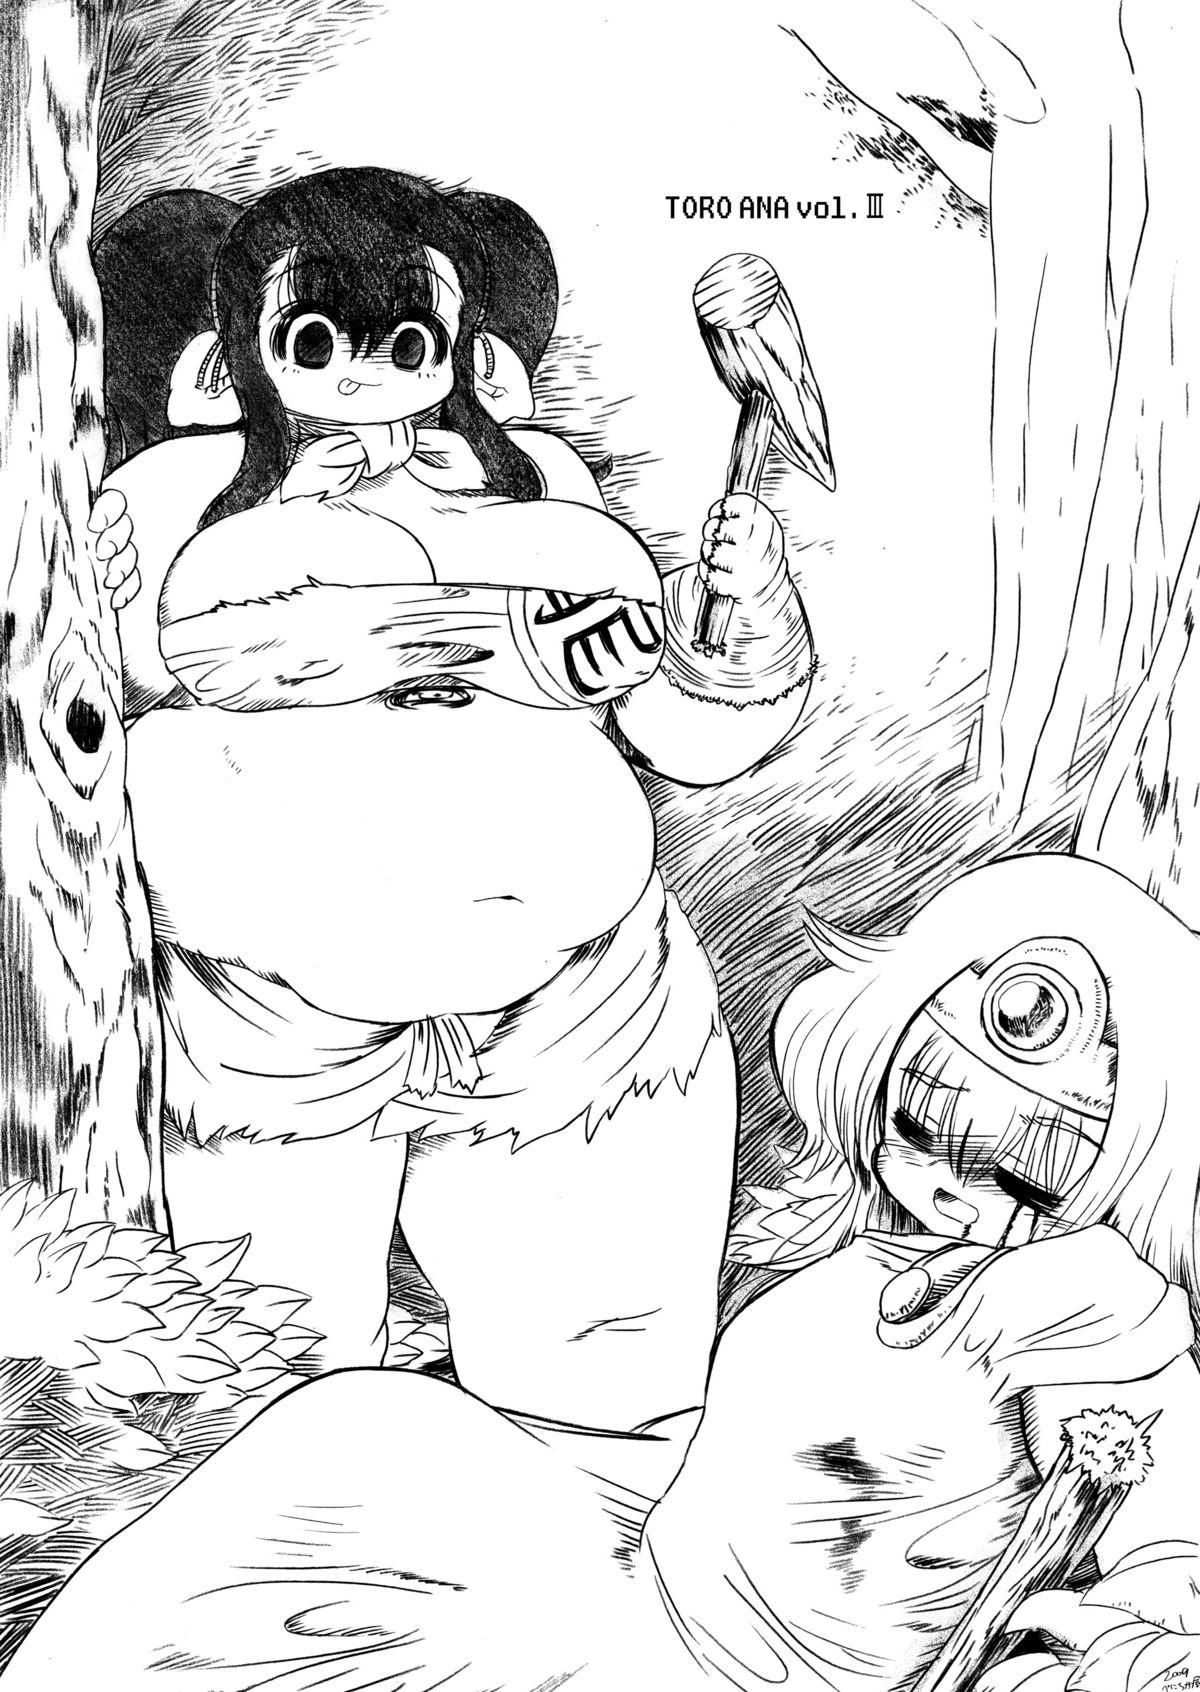 Transsexual トロあな～武闘家さんの熱烈愛玩調教～プラス - Dragon quest Titties - Page 2